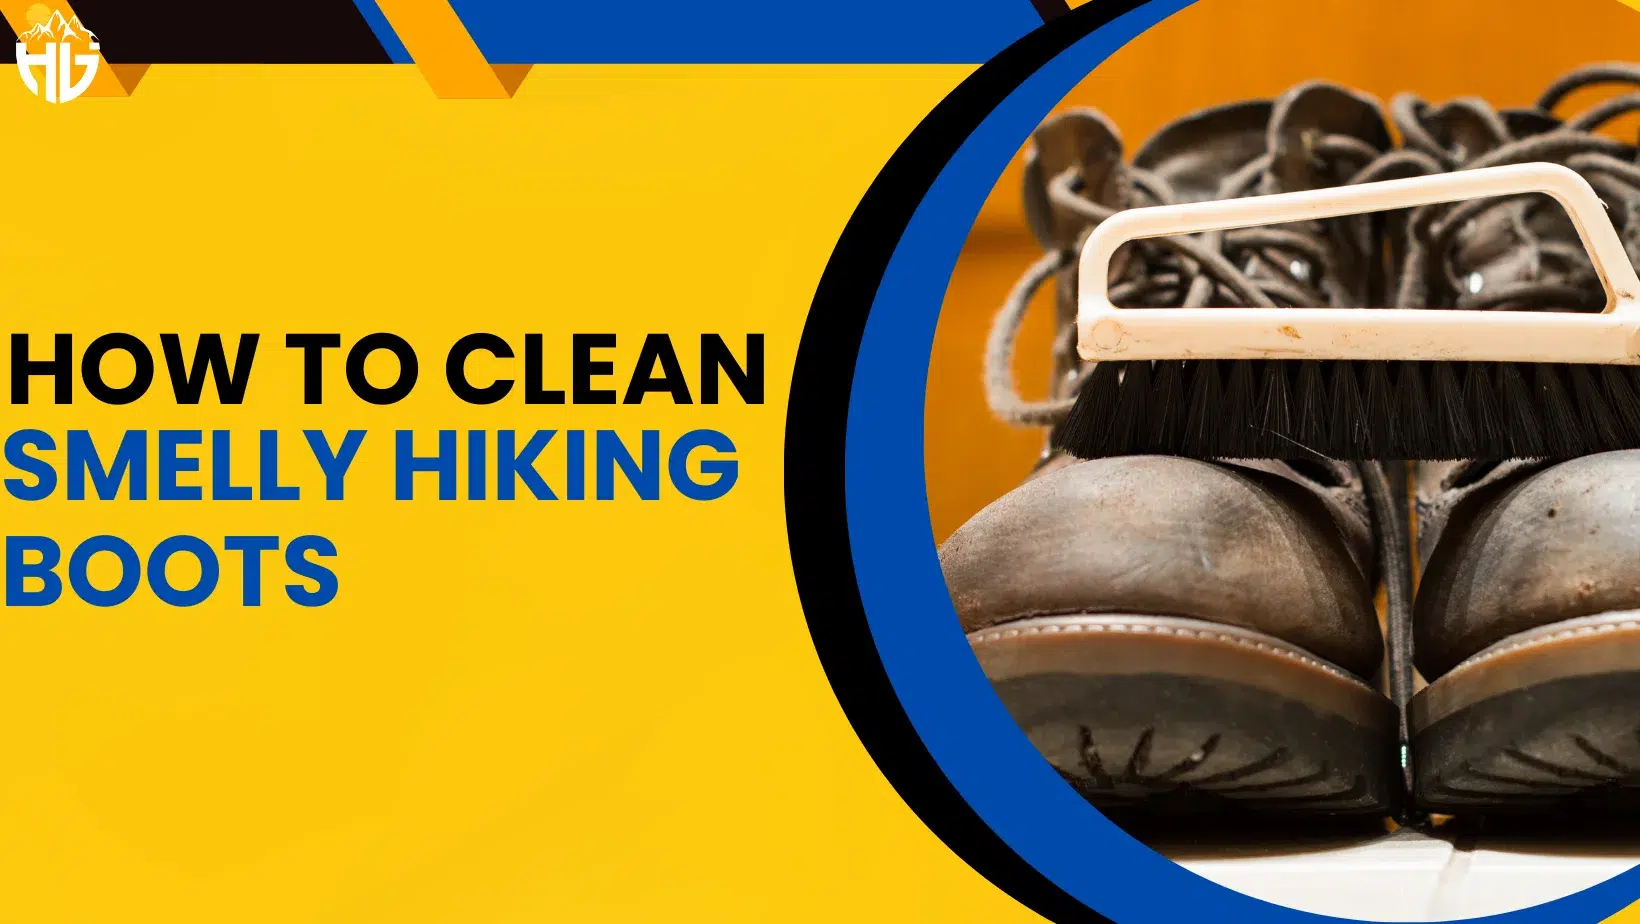 How To Clean Smelly Hiking Boots? - Hike Genius